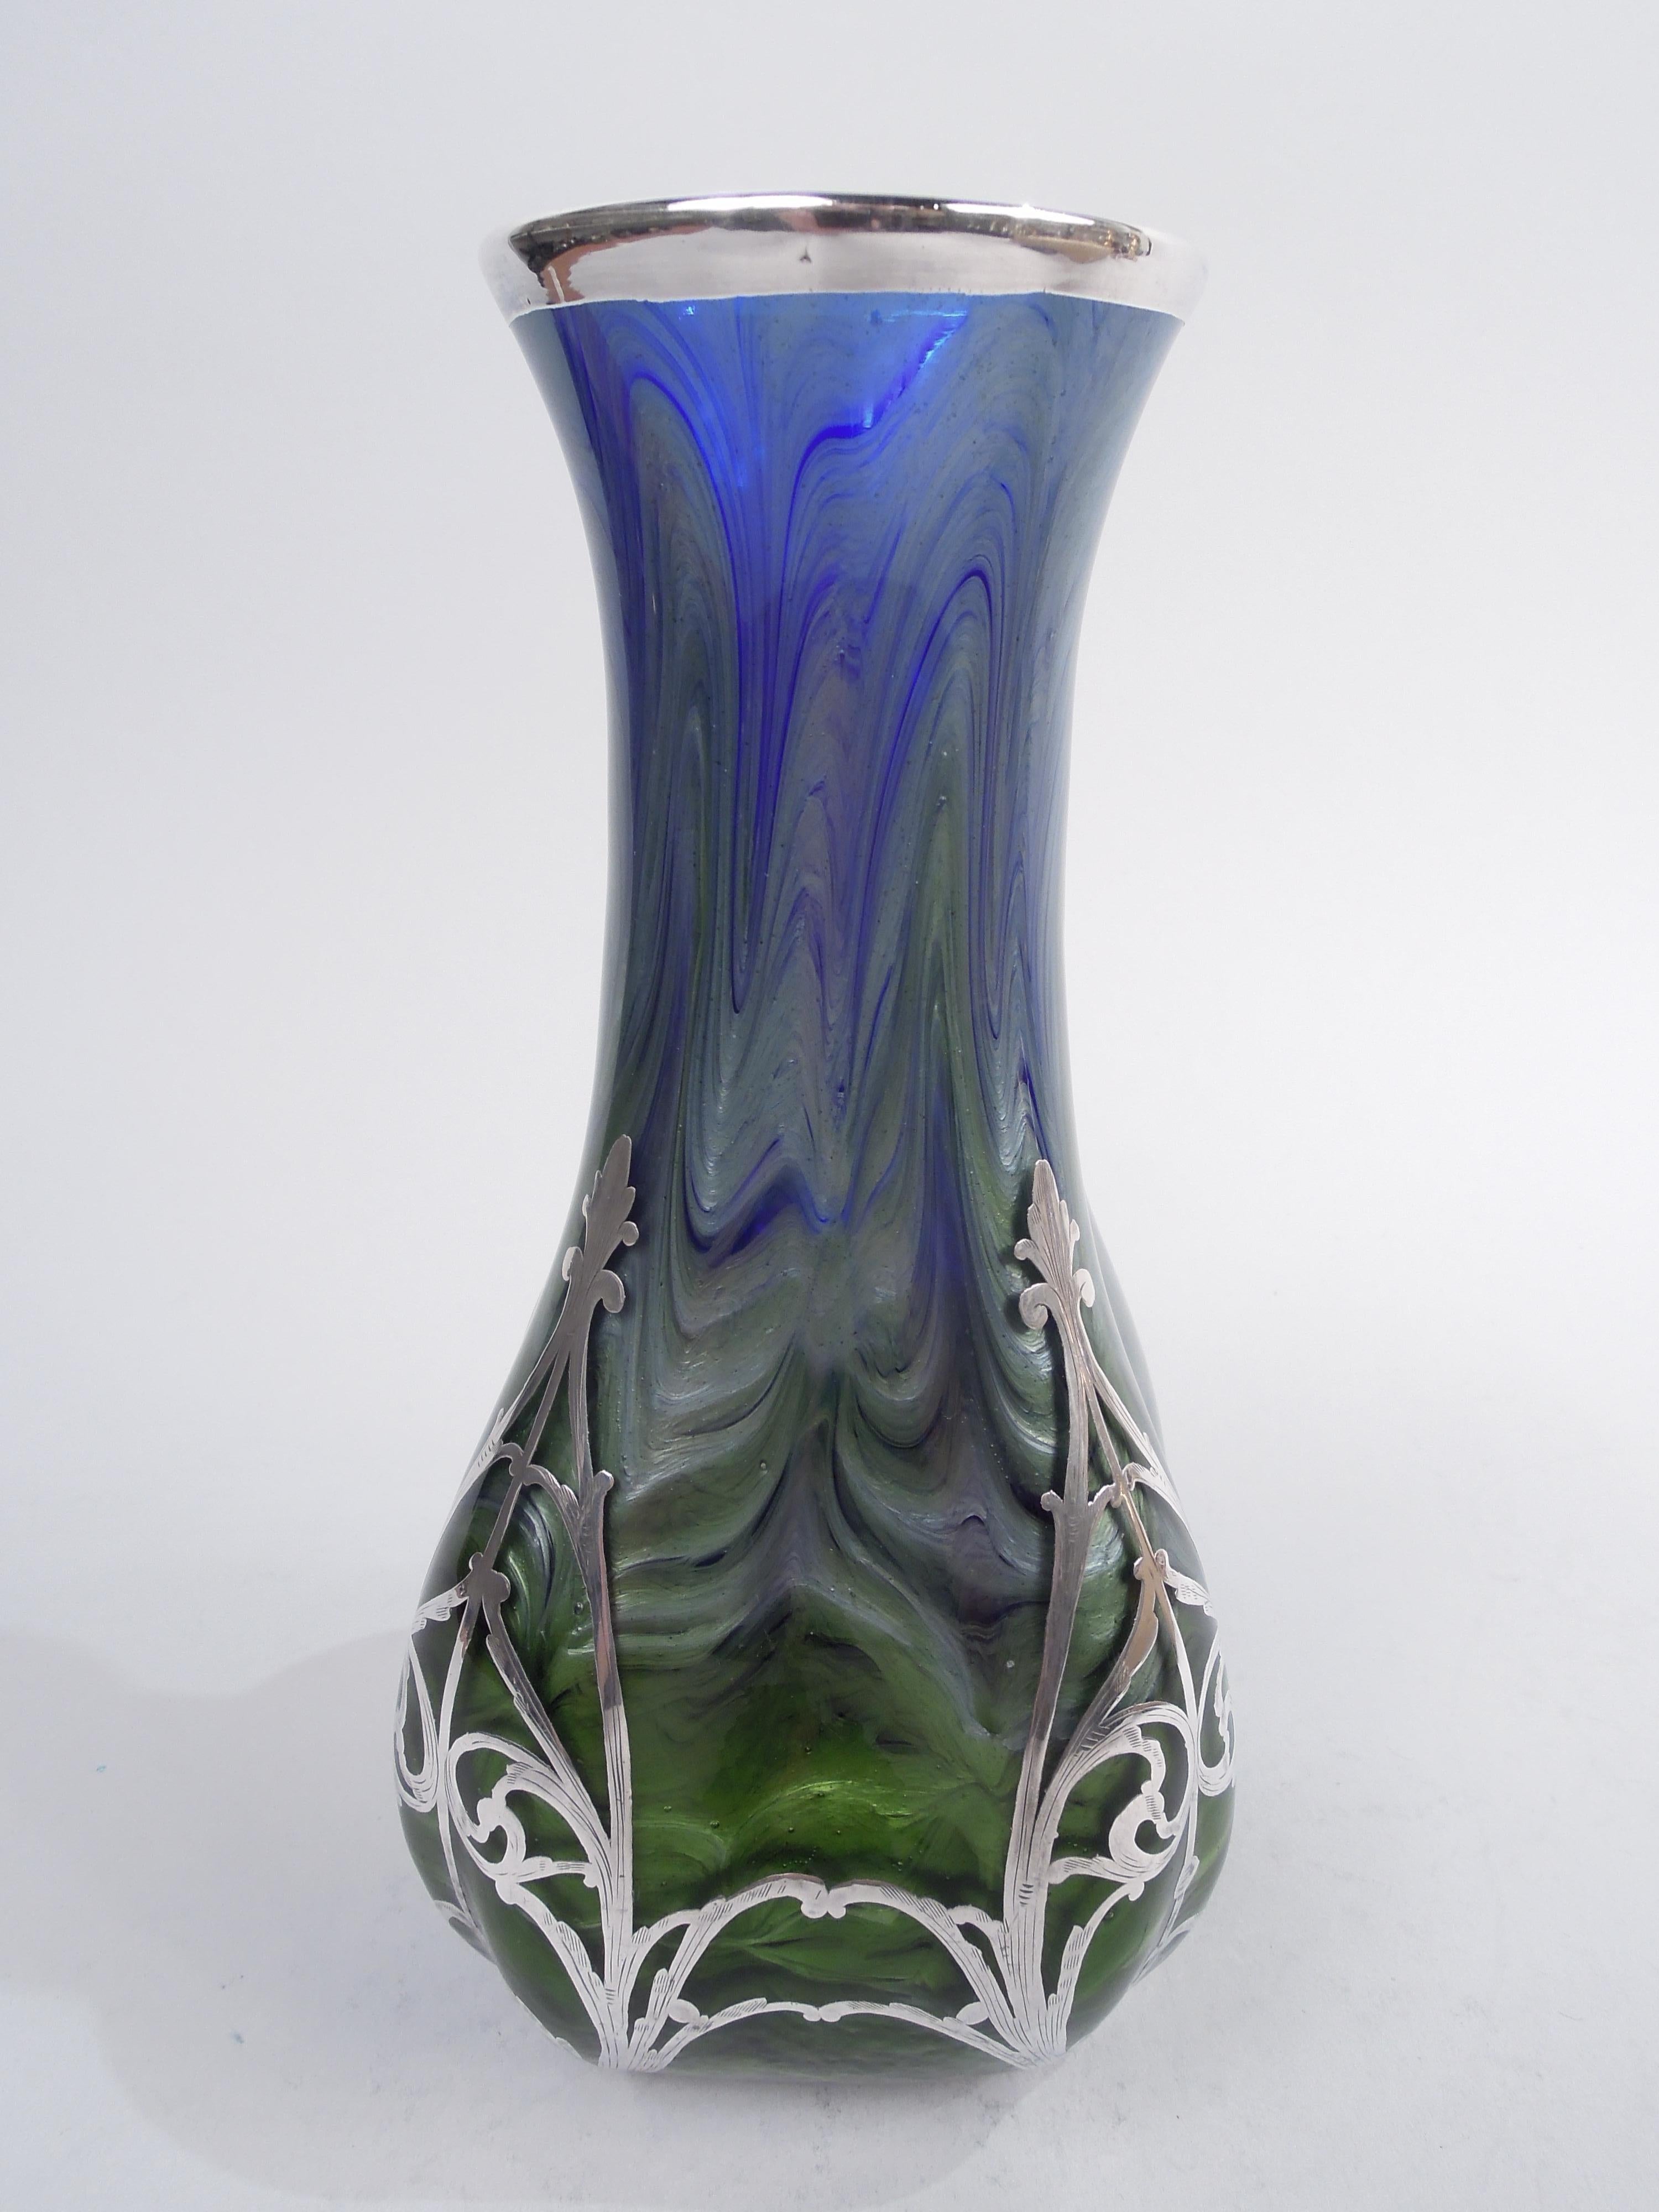 Gorgeous Titania glass vase by historic maker Loetz with engraved silver overlay, ca 1900. Upward tapering sides with gently flared mouth. Sides concave and corners chamfered. Overlay in form of vertical leafing scrollwork mounted at corners and